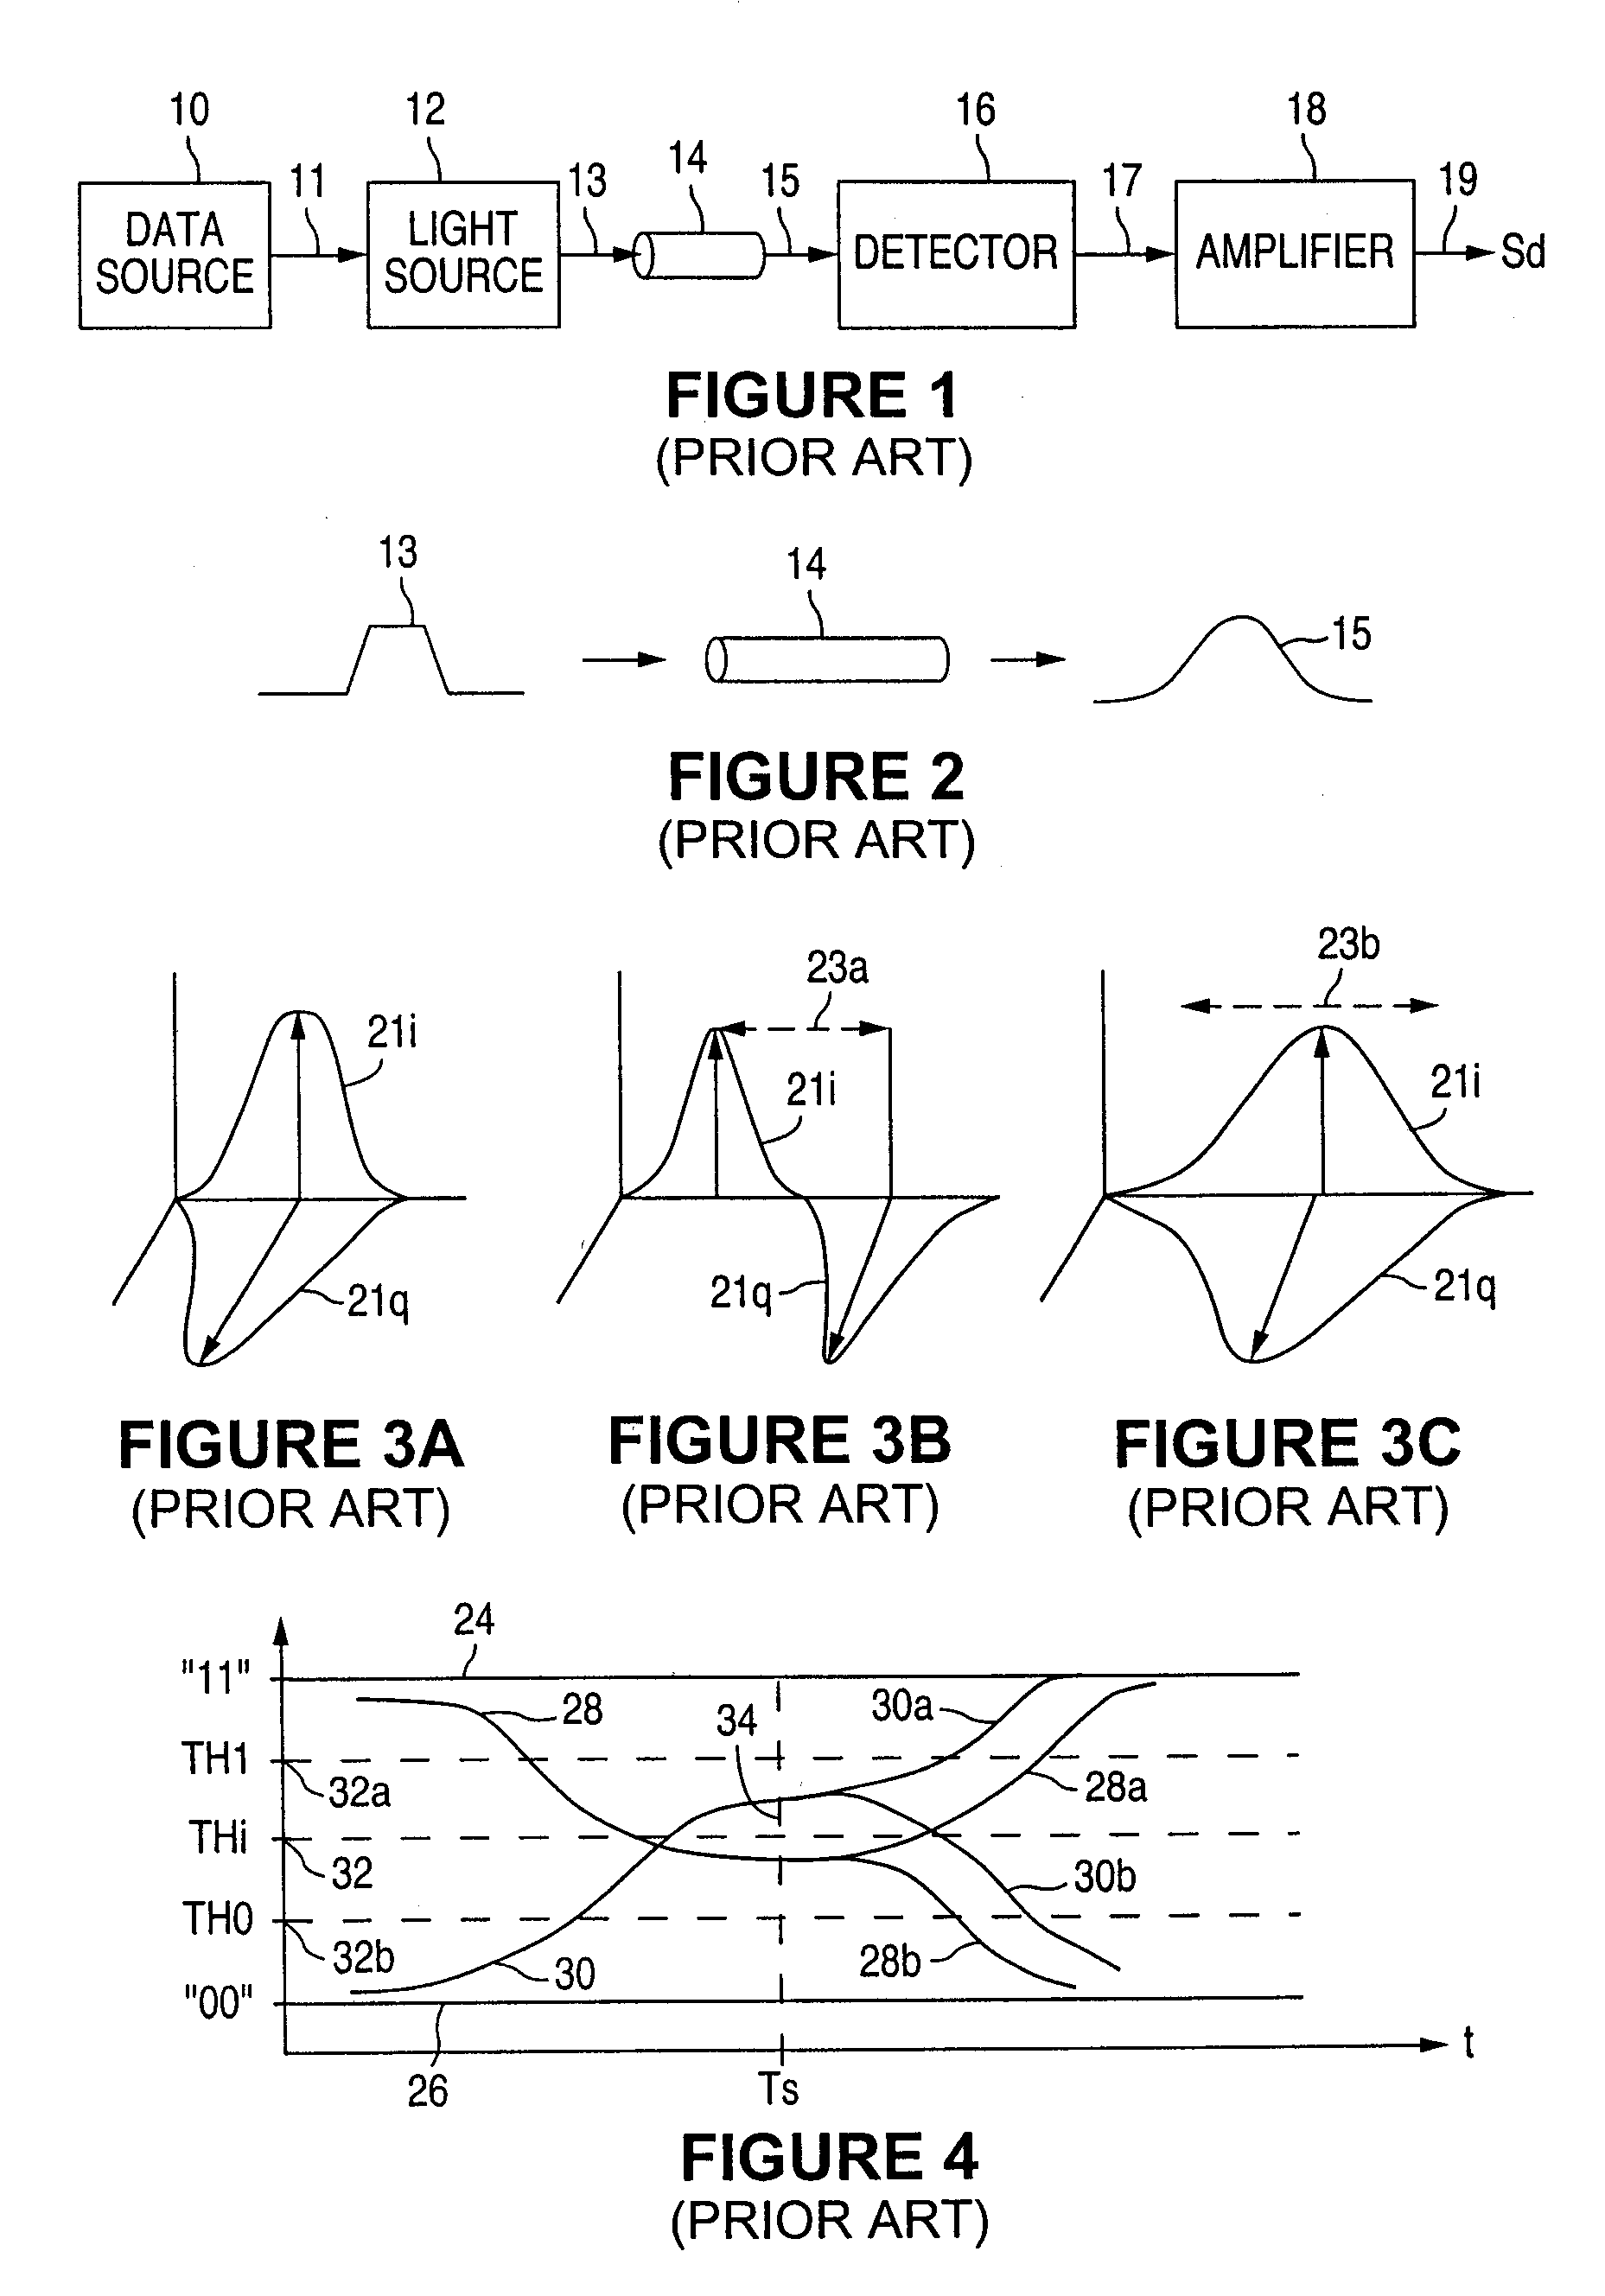 Compensation circuit and method for reducing intersymbol interference products caused by signal transmission via dispersive media